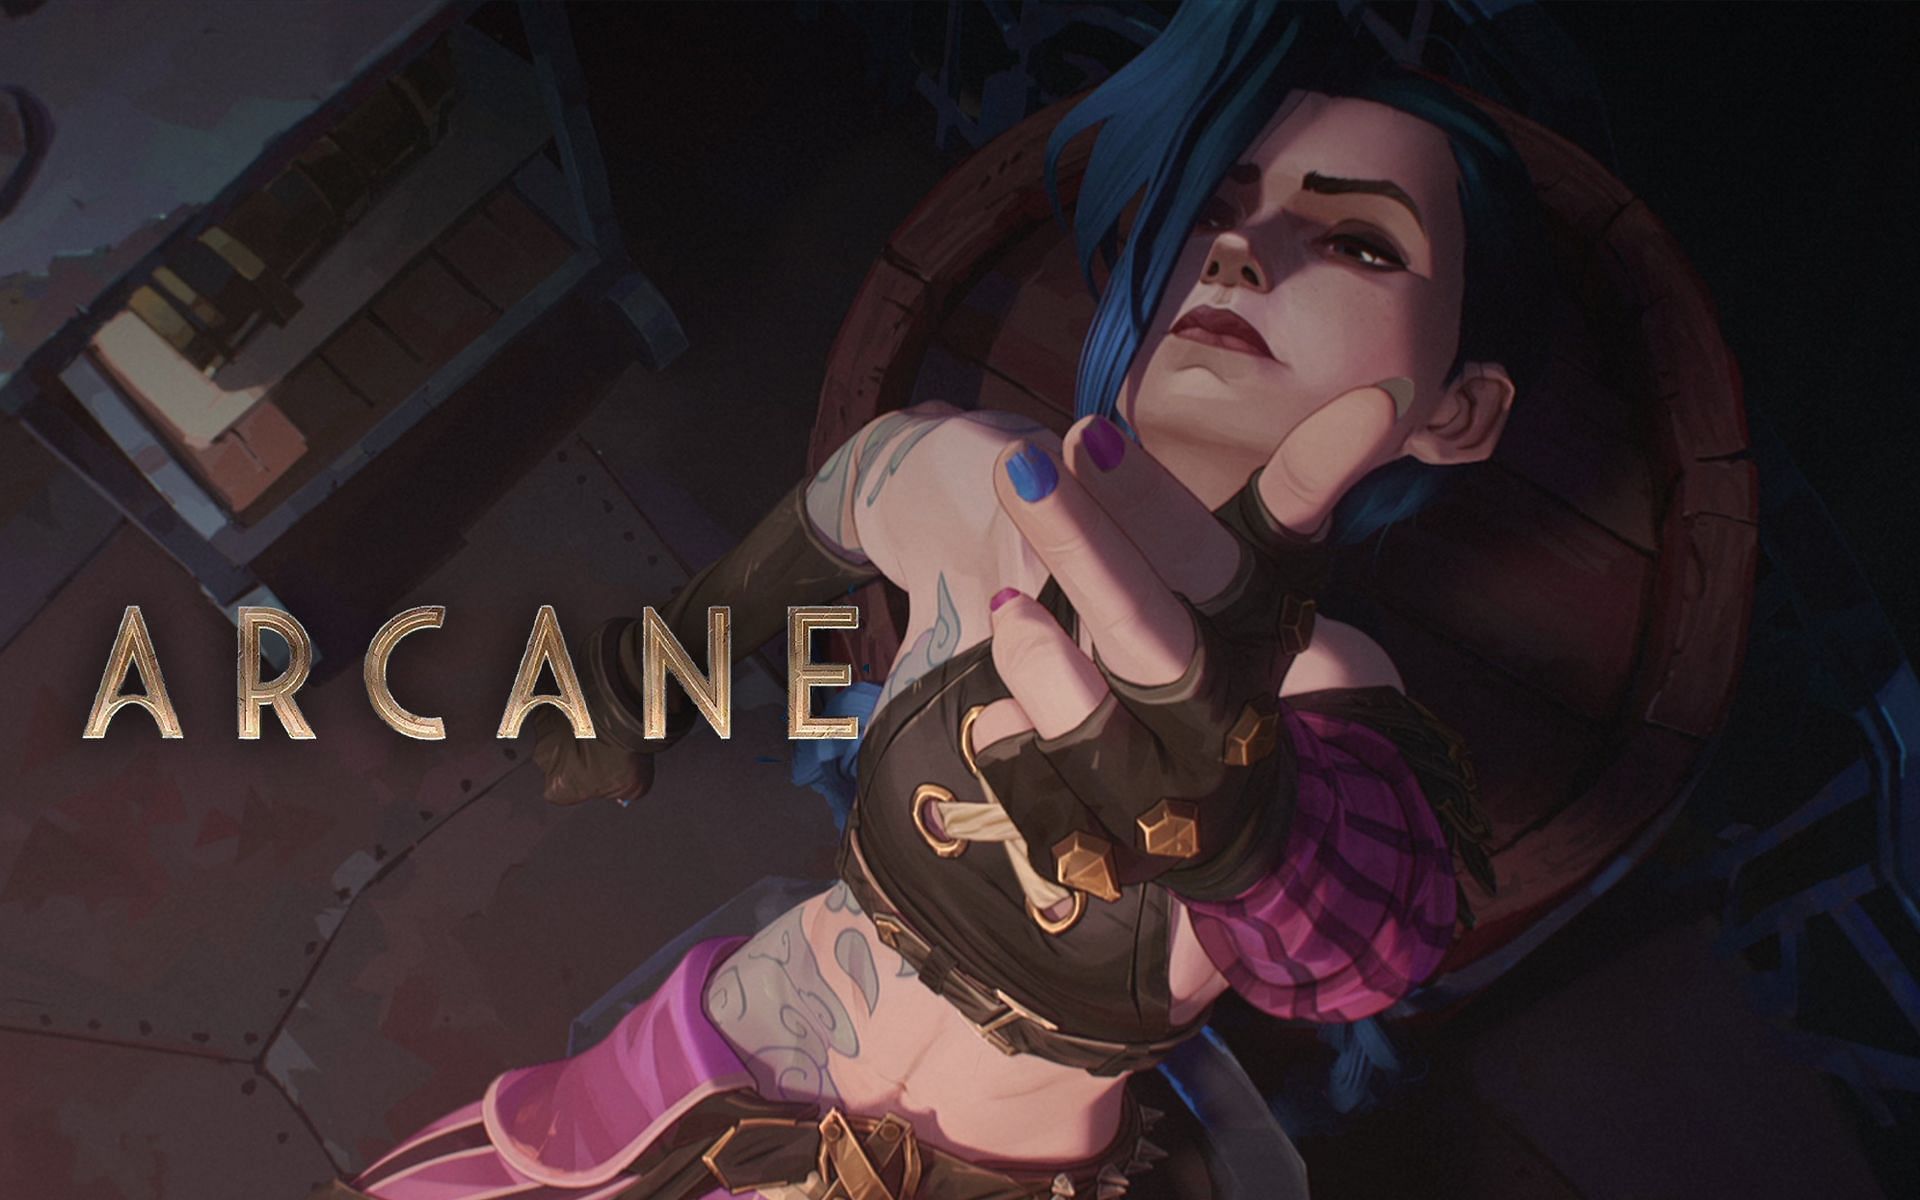 Arcane season 1 took 6 years to complete but assures season 2 will arrive  sooner Riot Games CEO  Pursue News